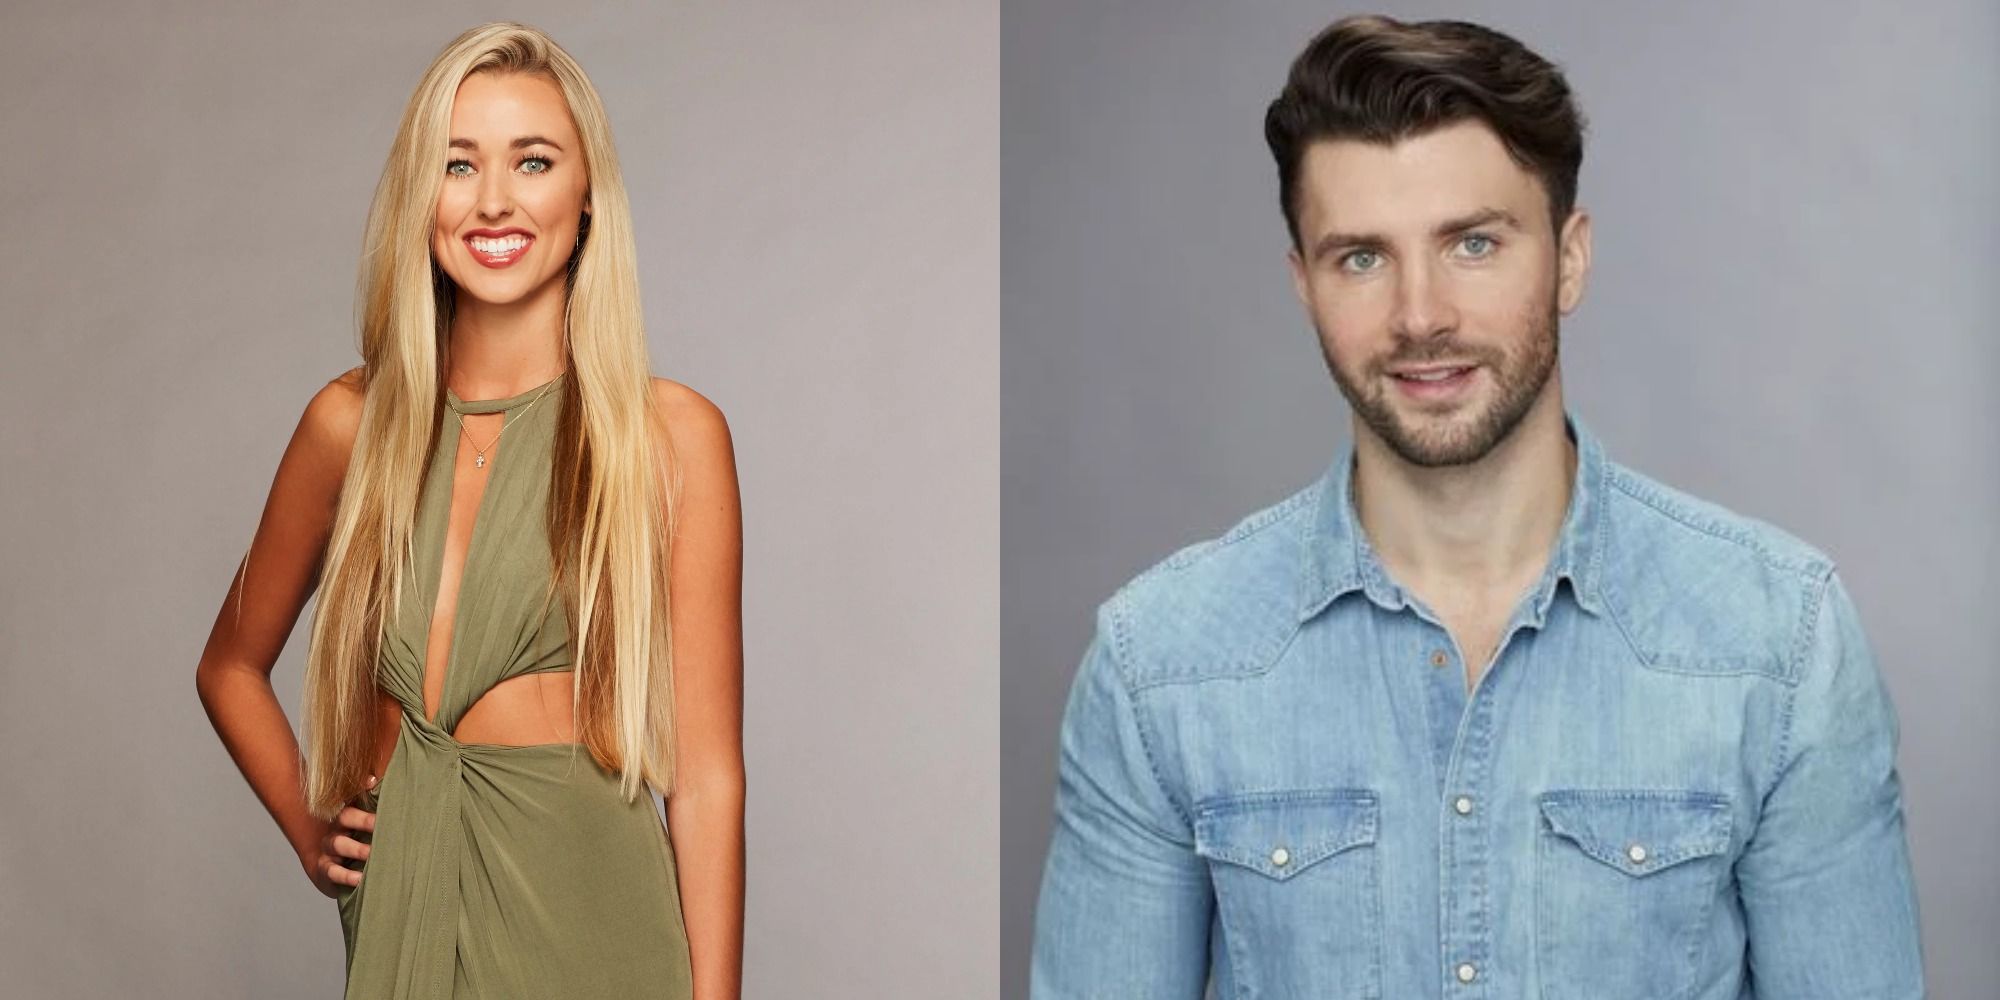 Split image showing Heather in The Bachelor and Kamil in The Bachelorette.